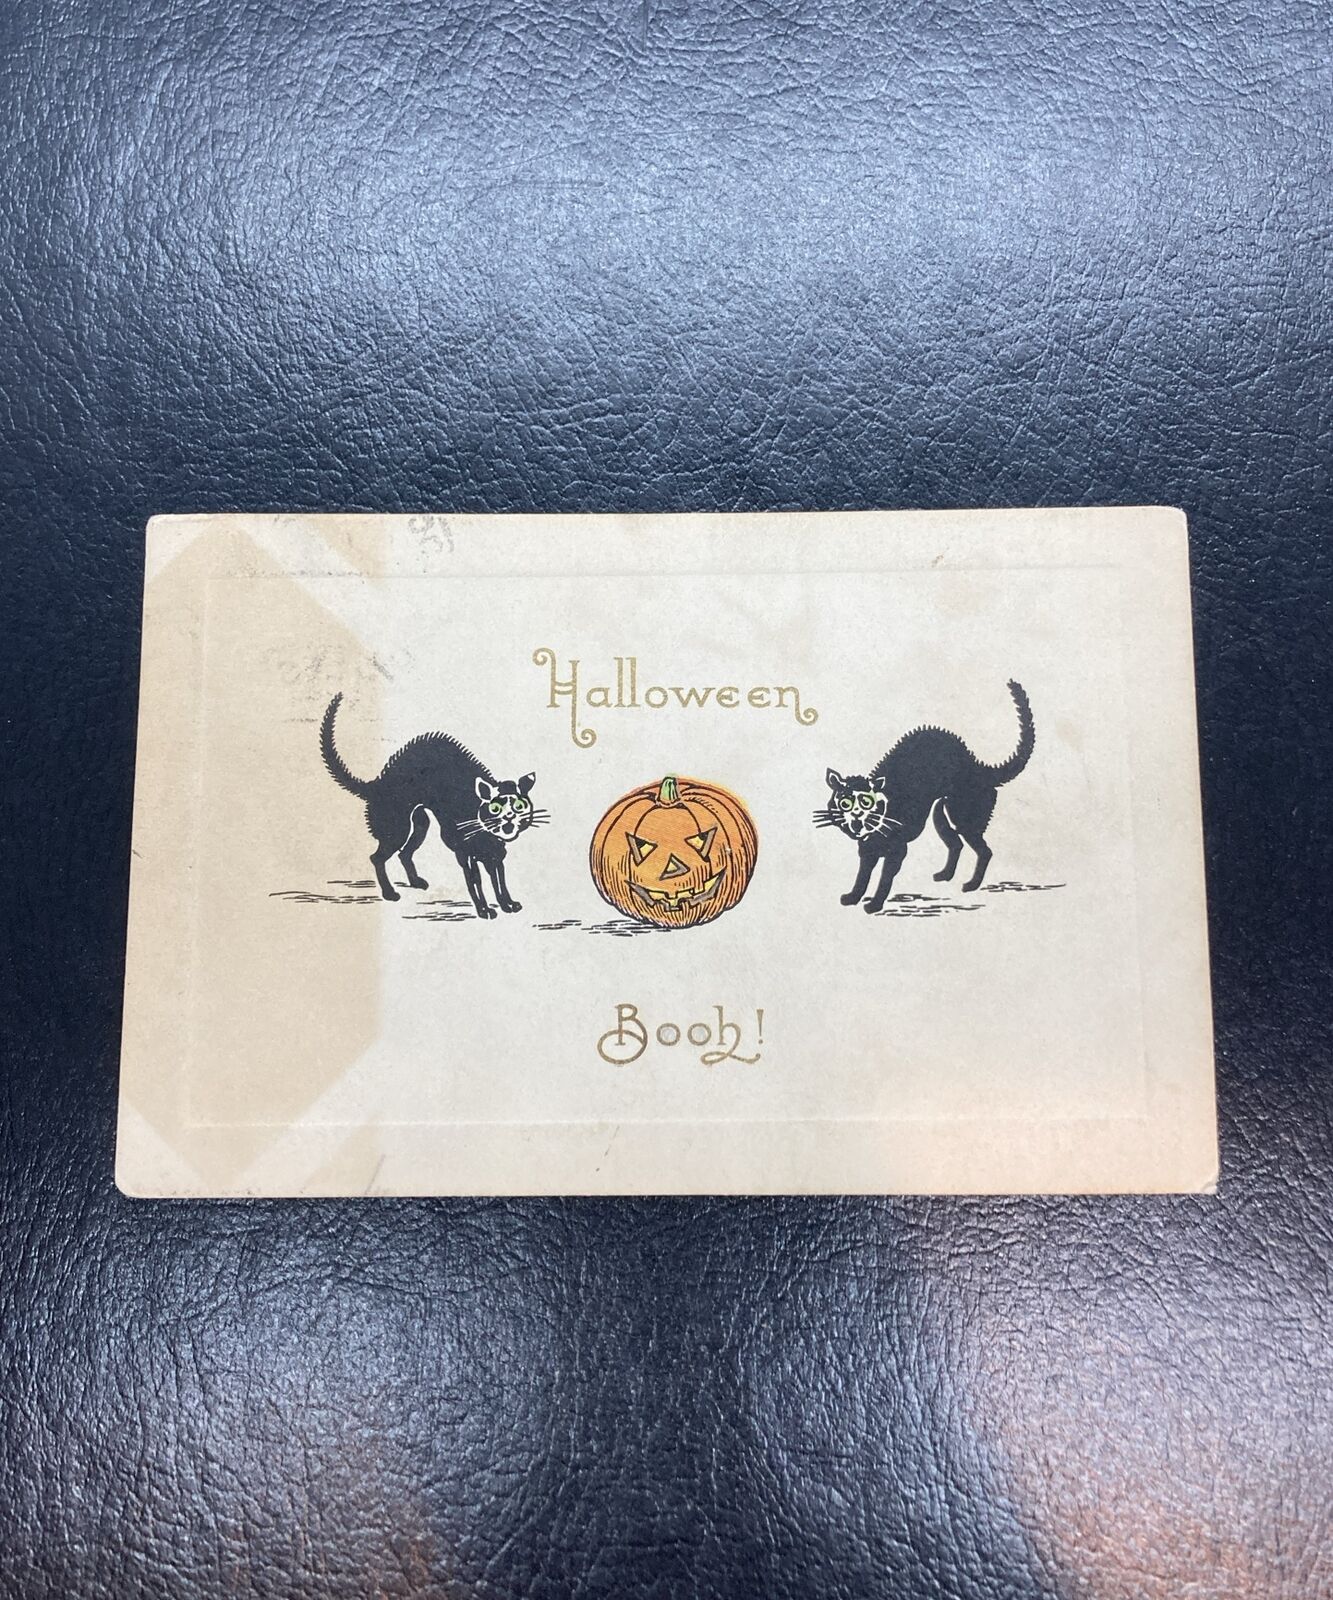 Halloween Booh Black Cats Gibson Postcard Posted 1911 Stained Damaged As Is